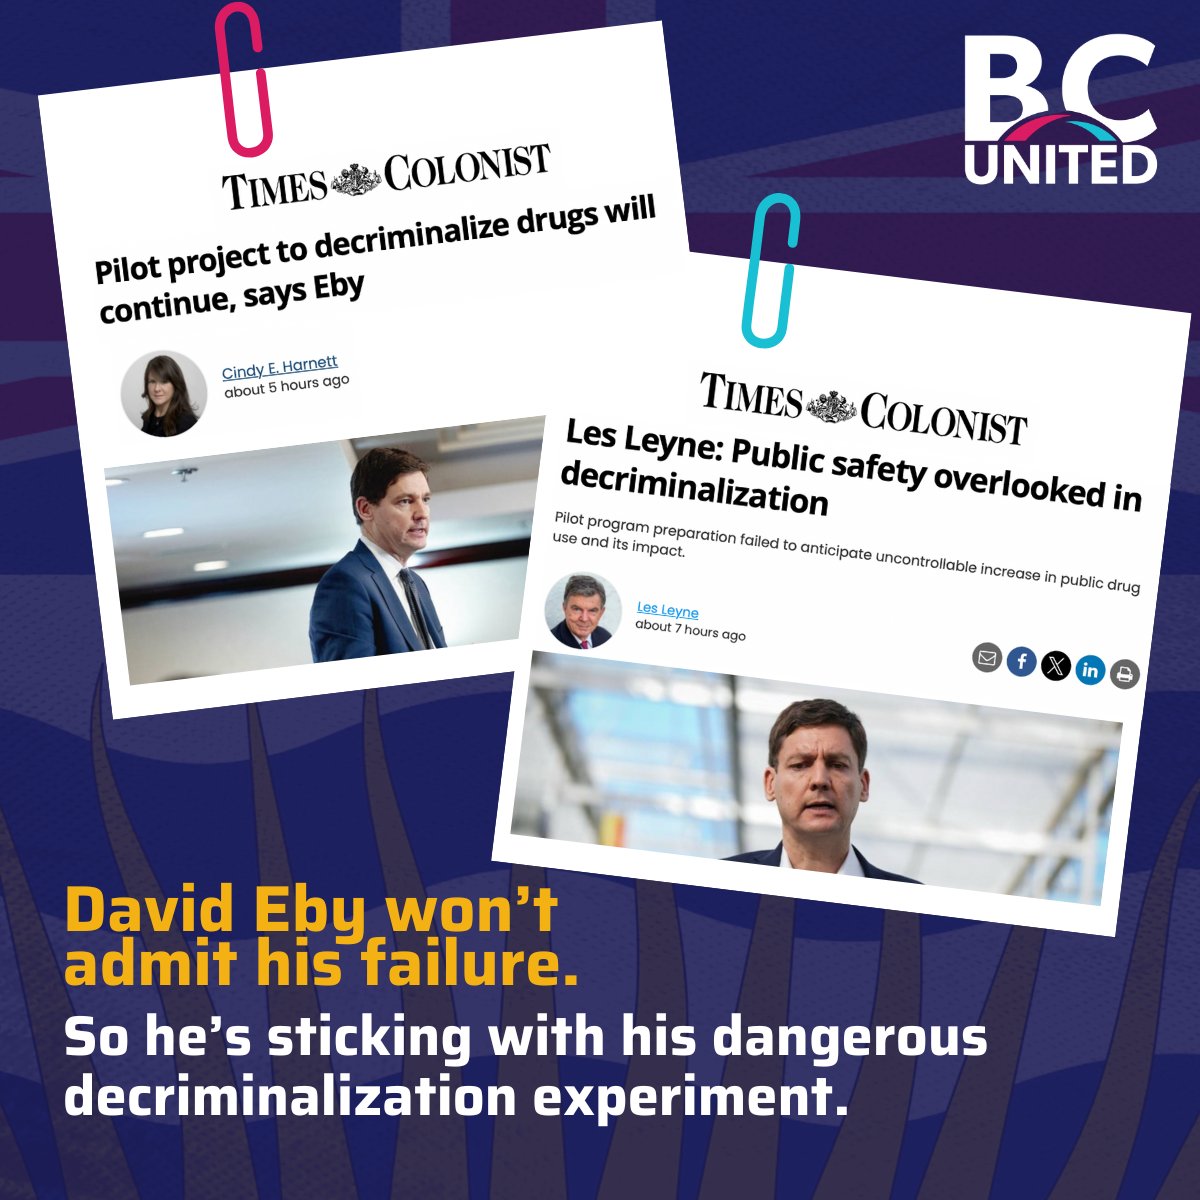 David Eby's NDP won't admit when they're wrong, so they're sticking with their dangerous decriminalization experiment. It's time they adopt BC United's plan to scrap decriminalization completely.